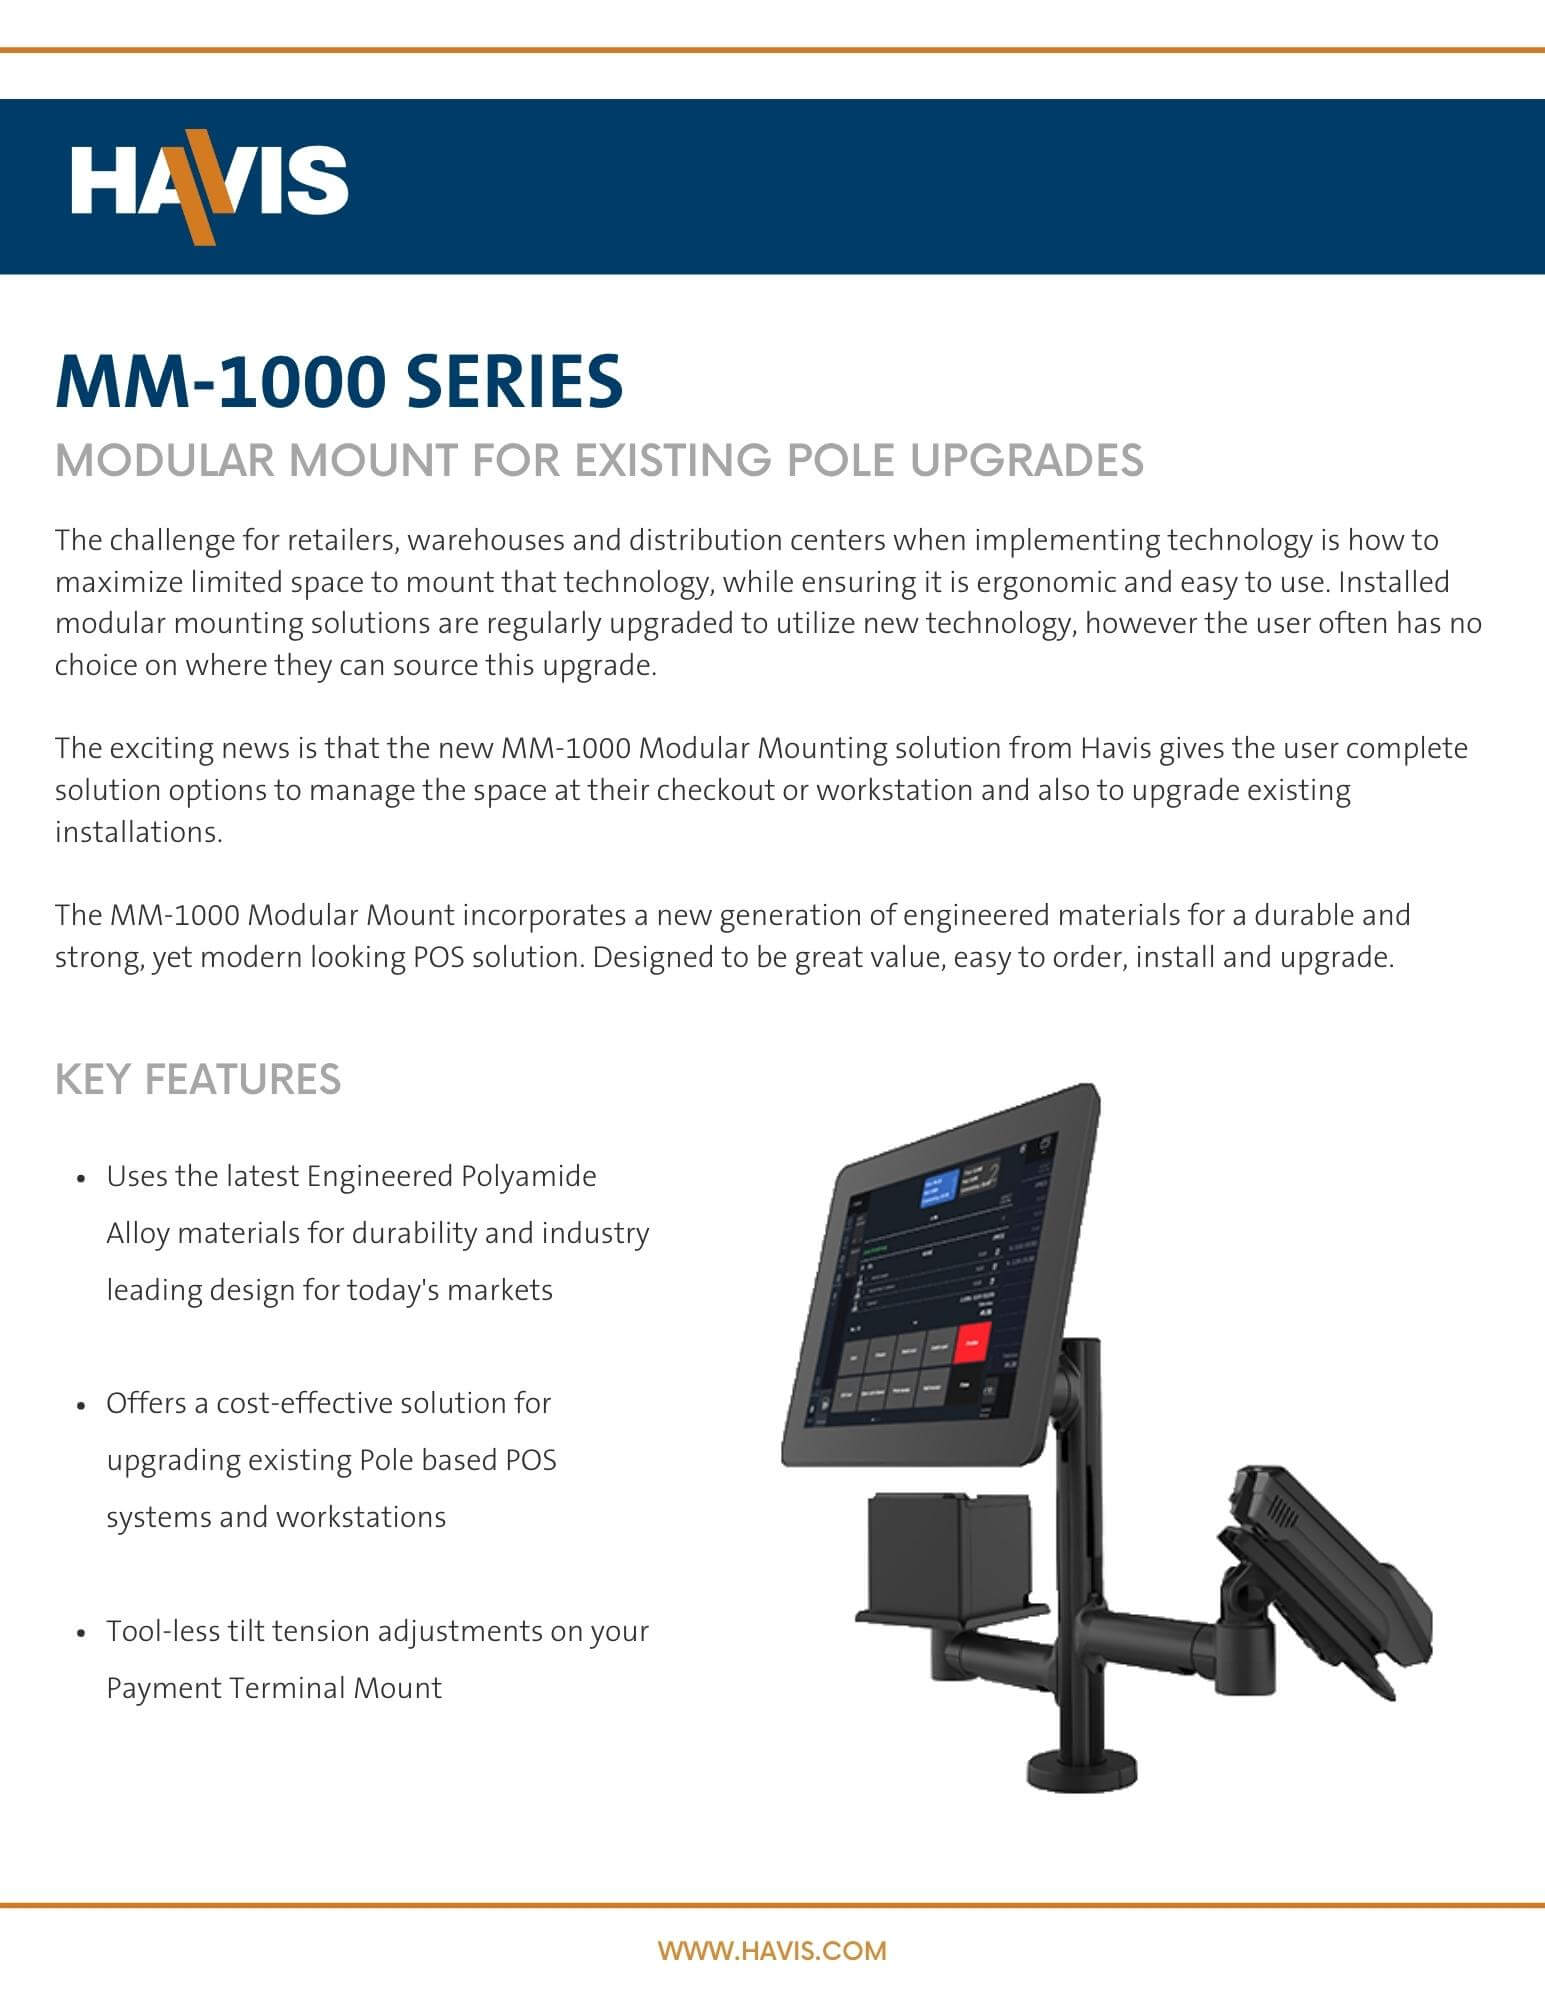 MM-1000 Series for Existing Installations Product Guide